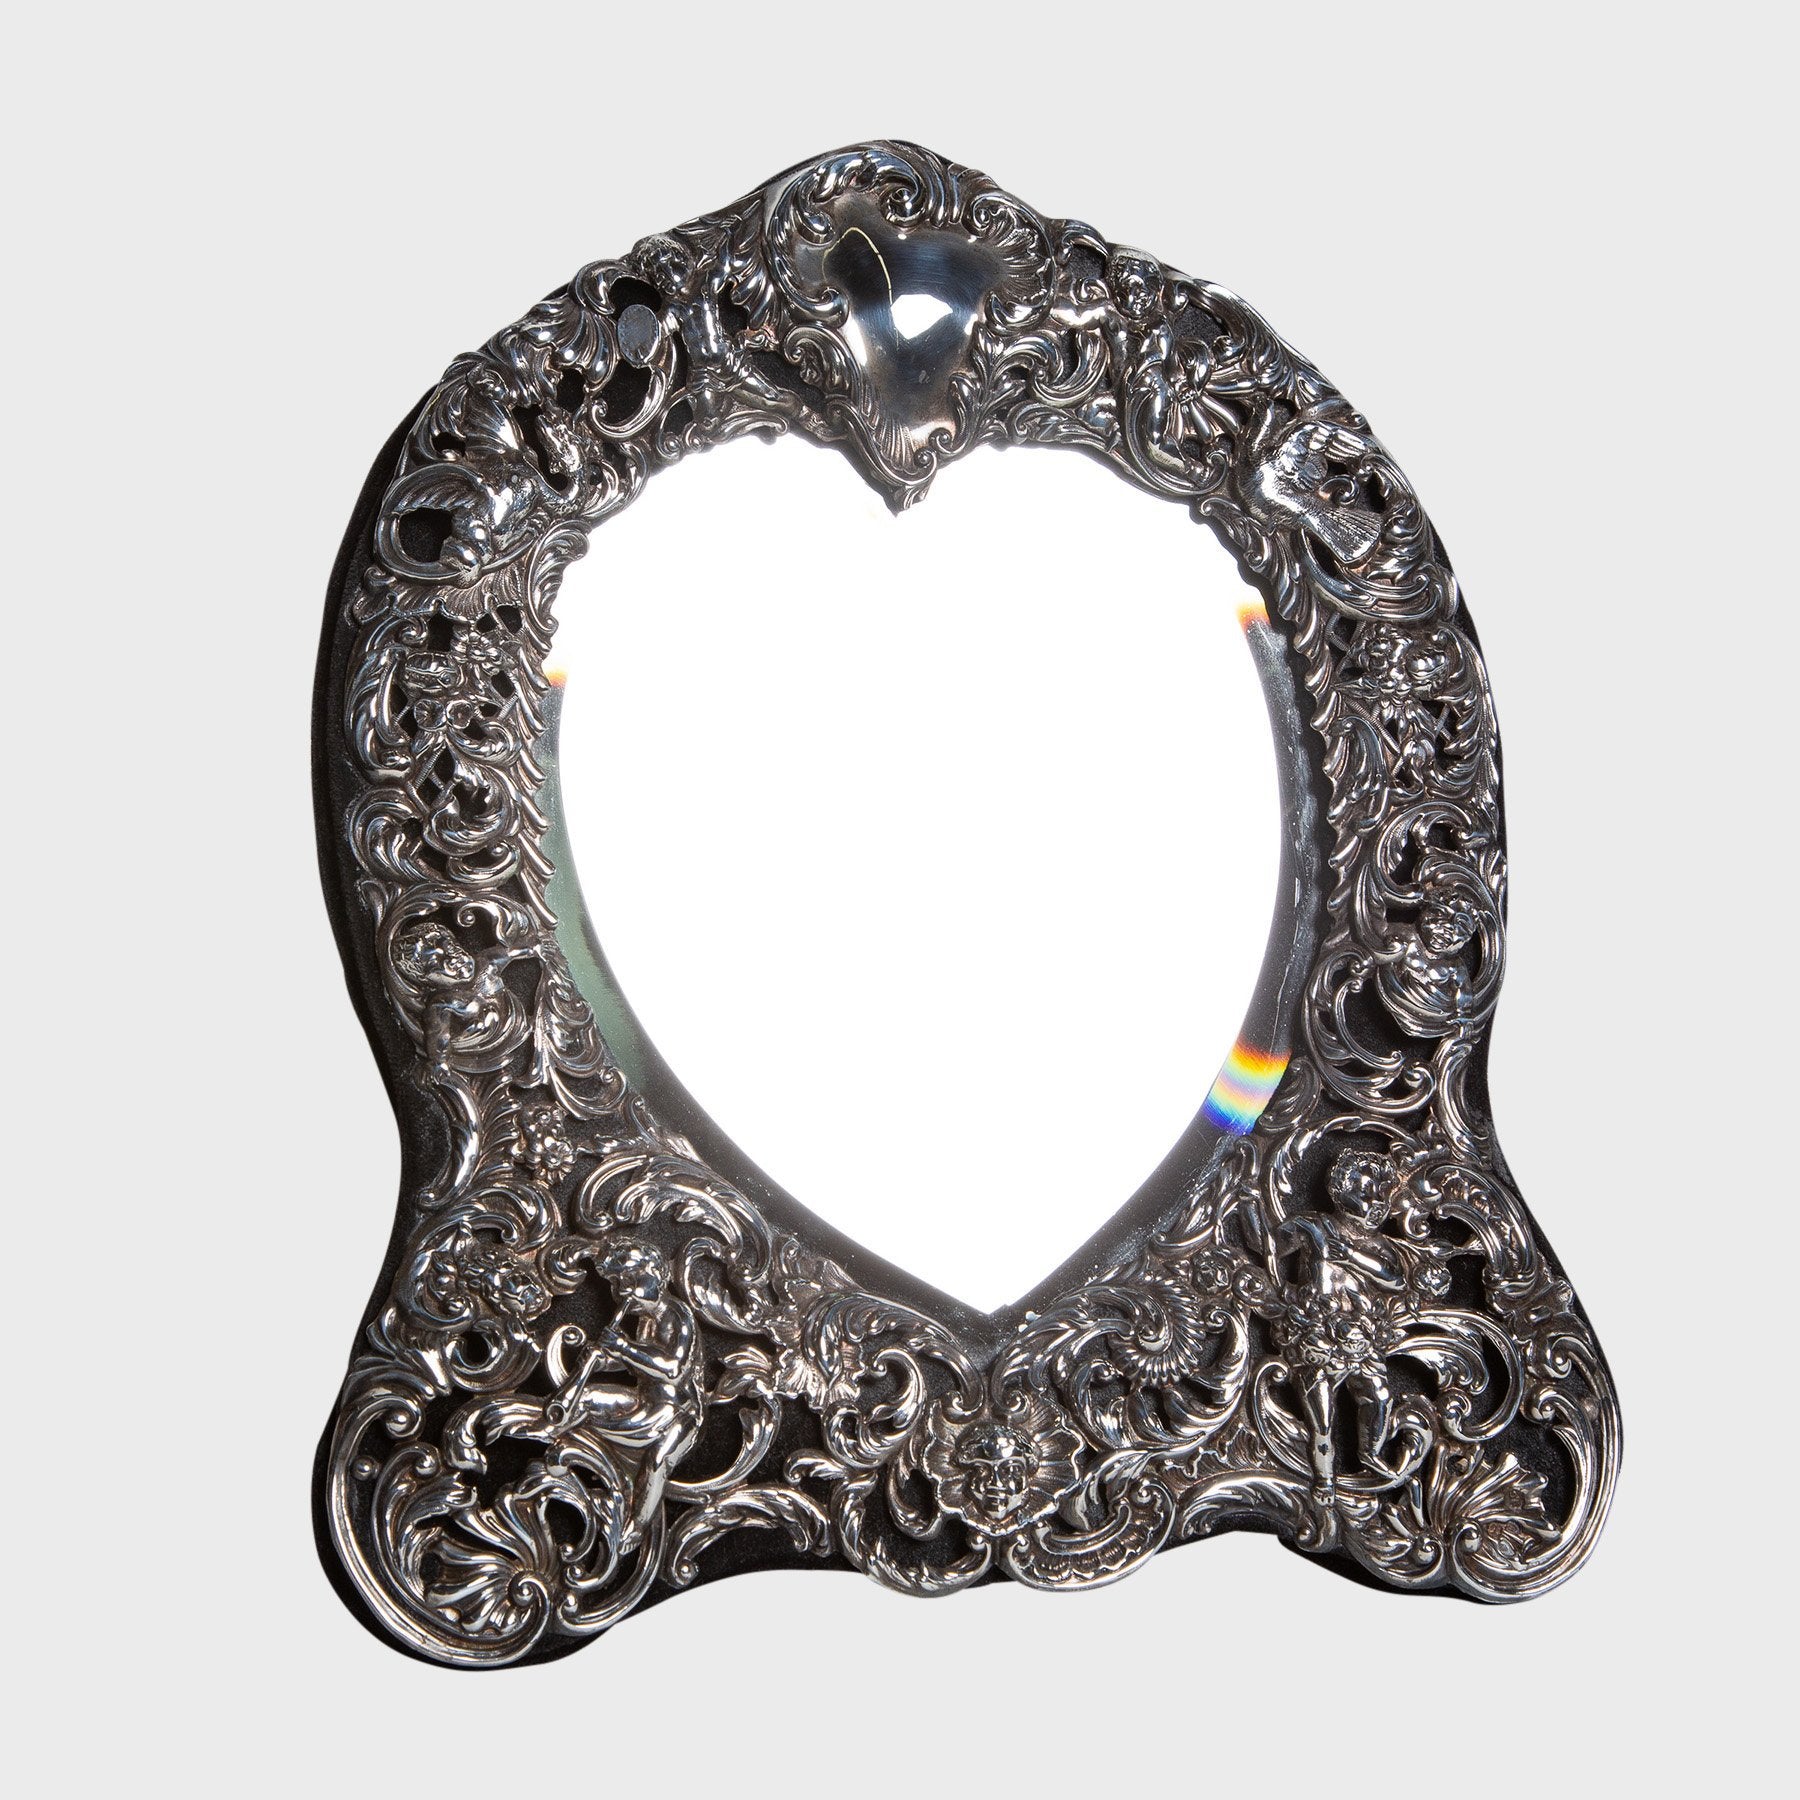 MAXFIELD PRIVATE COLLECTION | 1890 HEART PICTURE FRAME